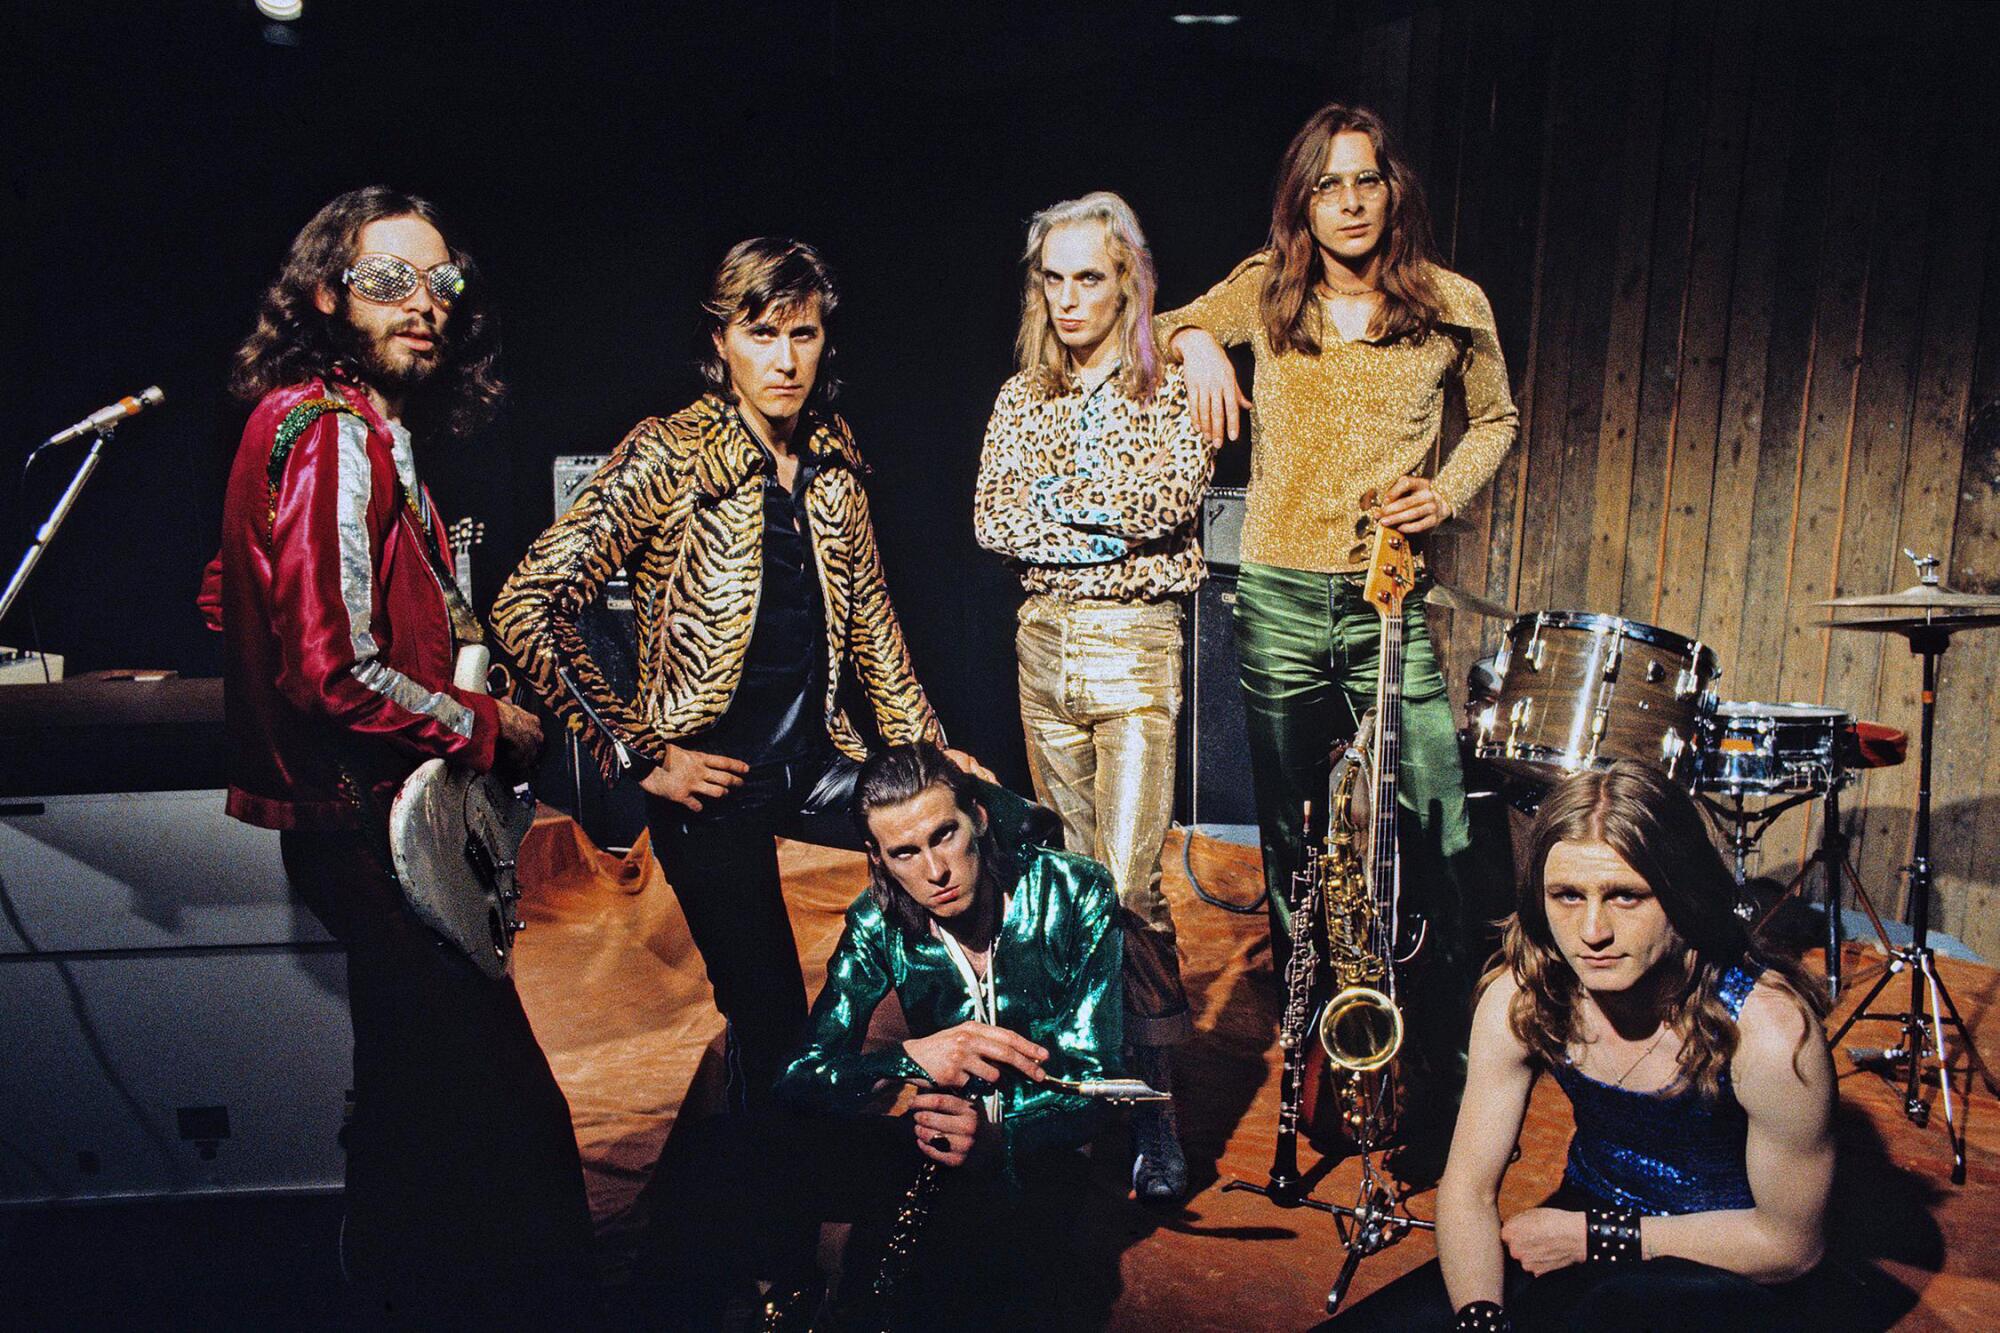 A six-member glam-rock band from the 1970s